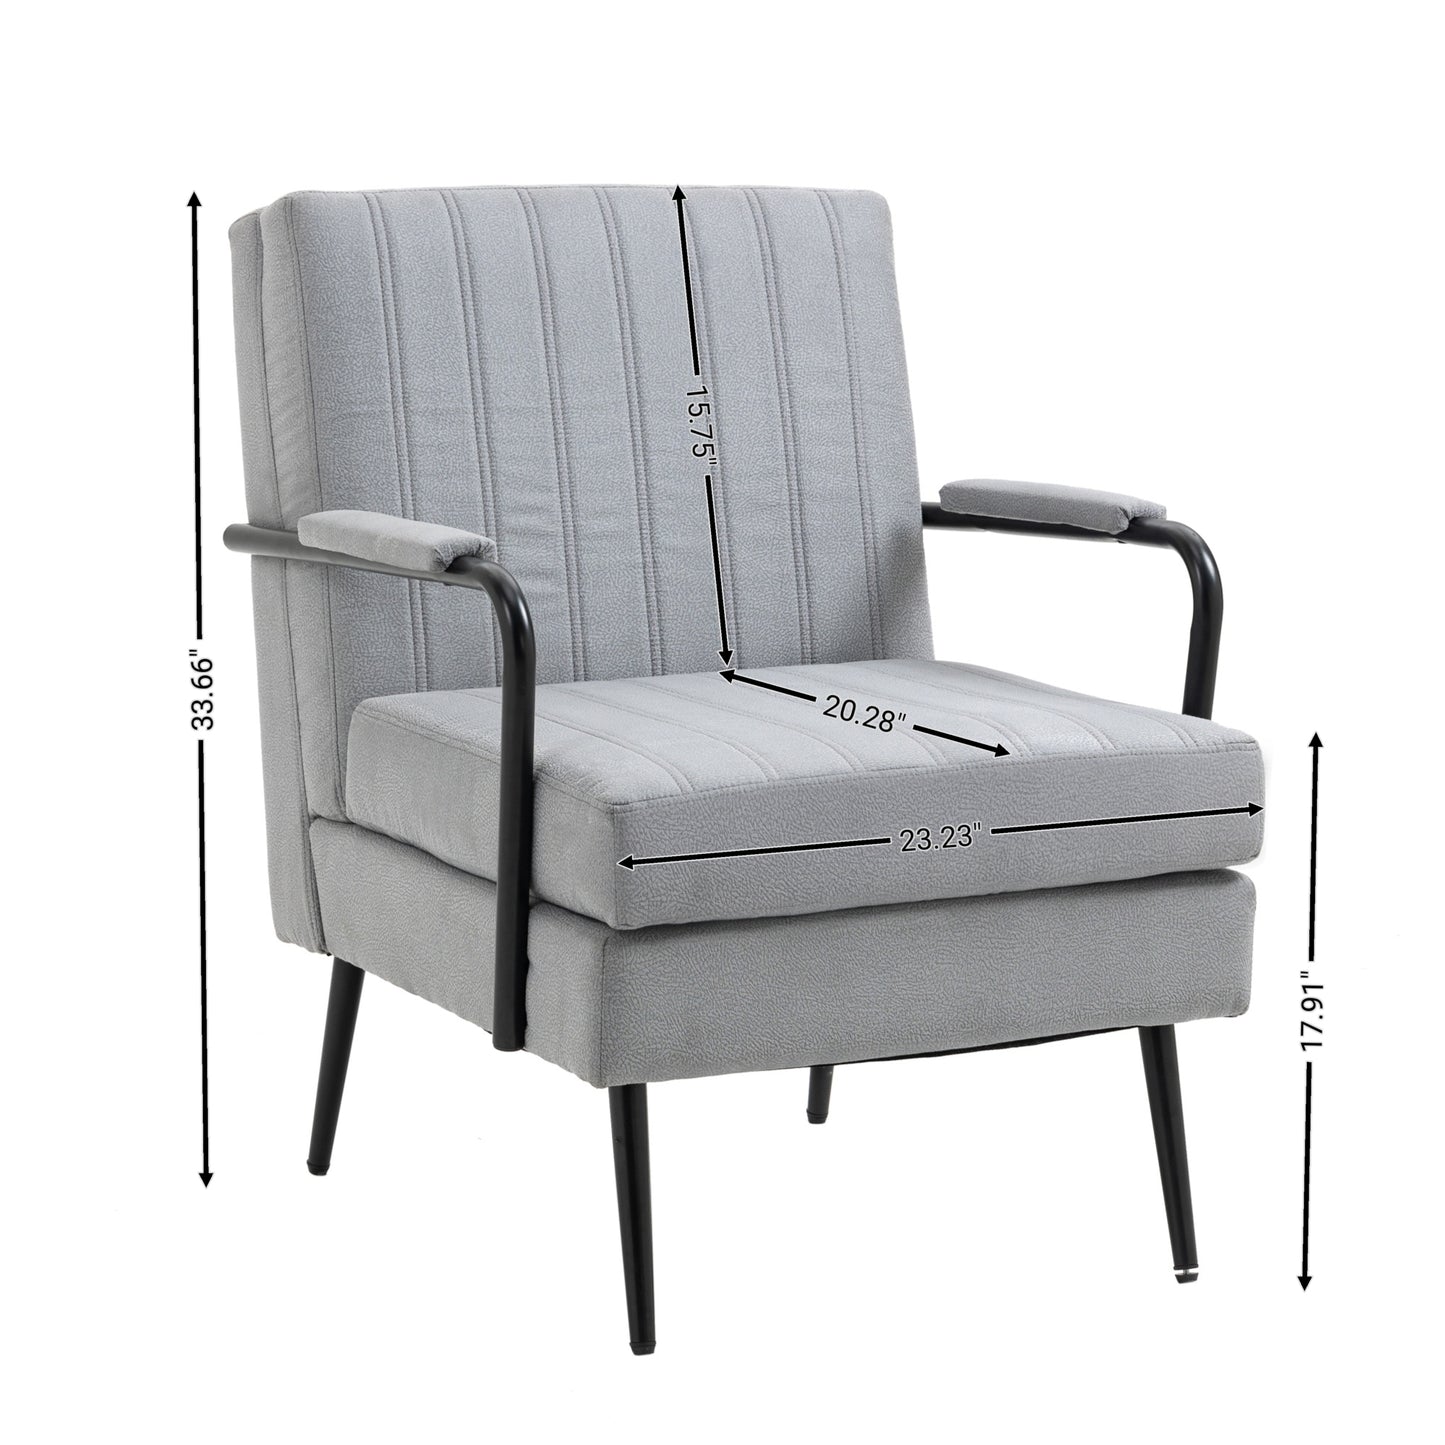 Mid-Century Modern Accent Chair Armchair, Lounge Chair Reading Chair with Metal Leg for Living Room Bedroom Office, Grey